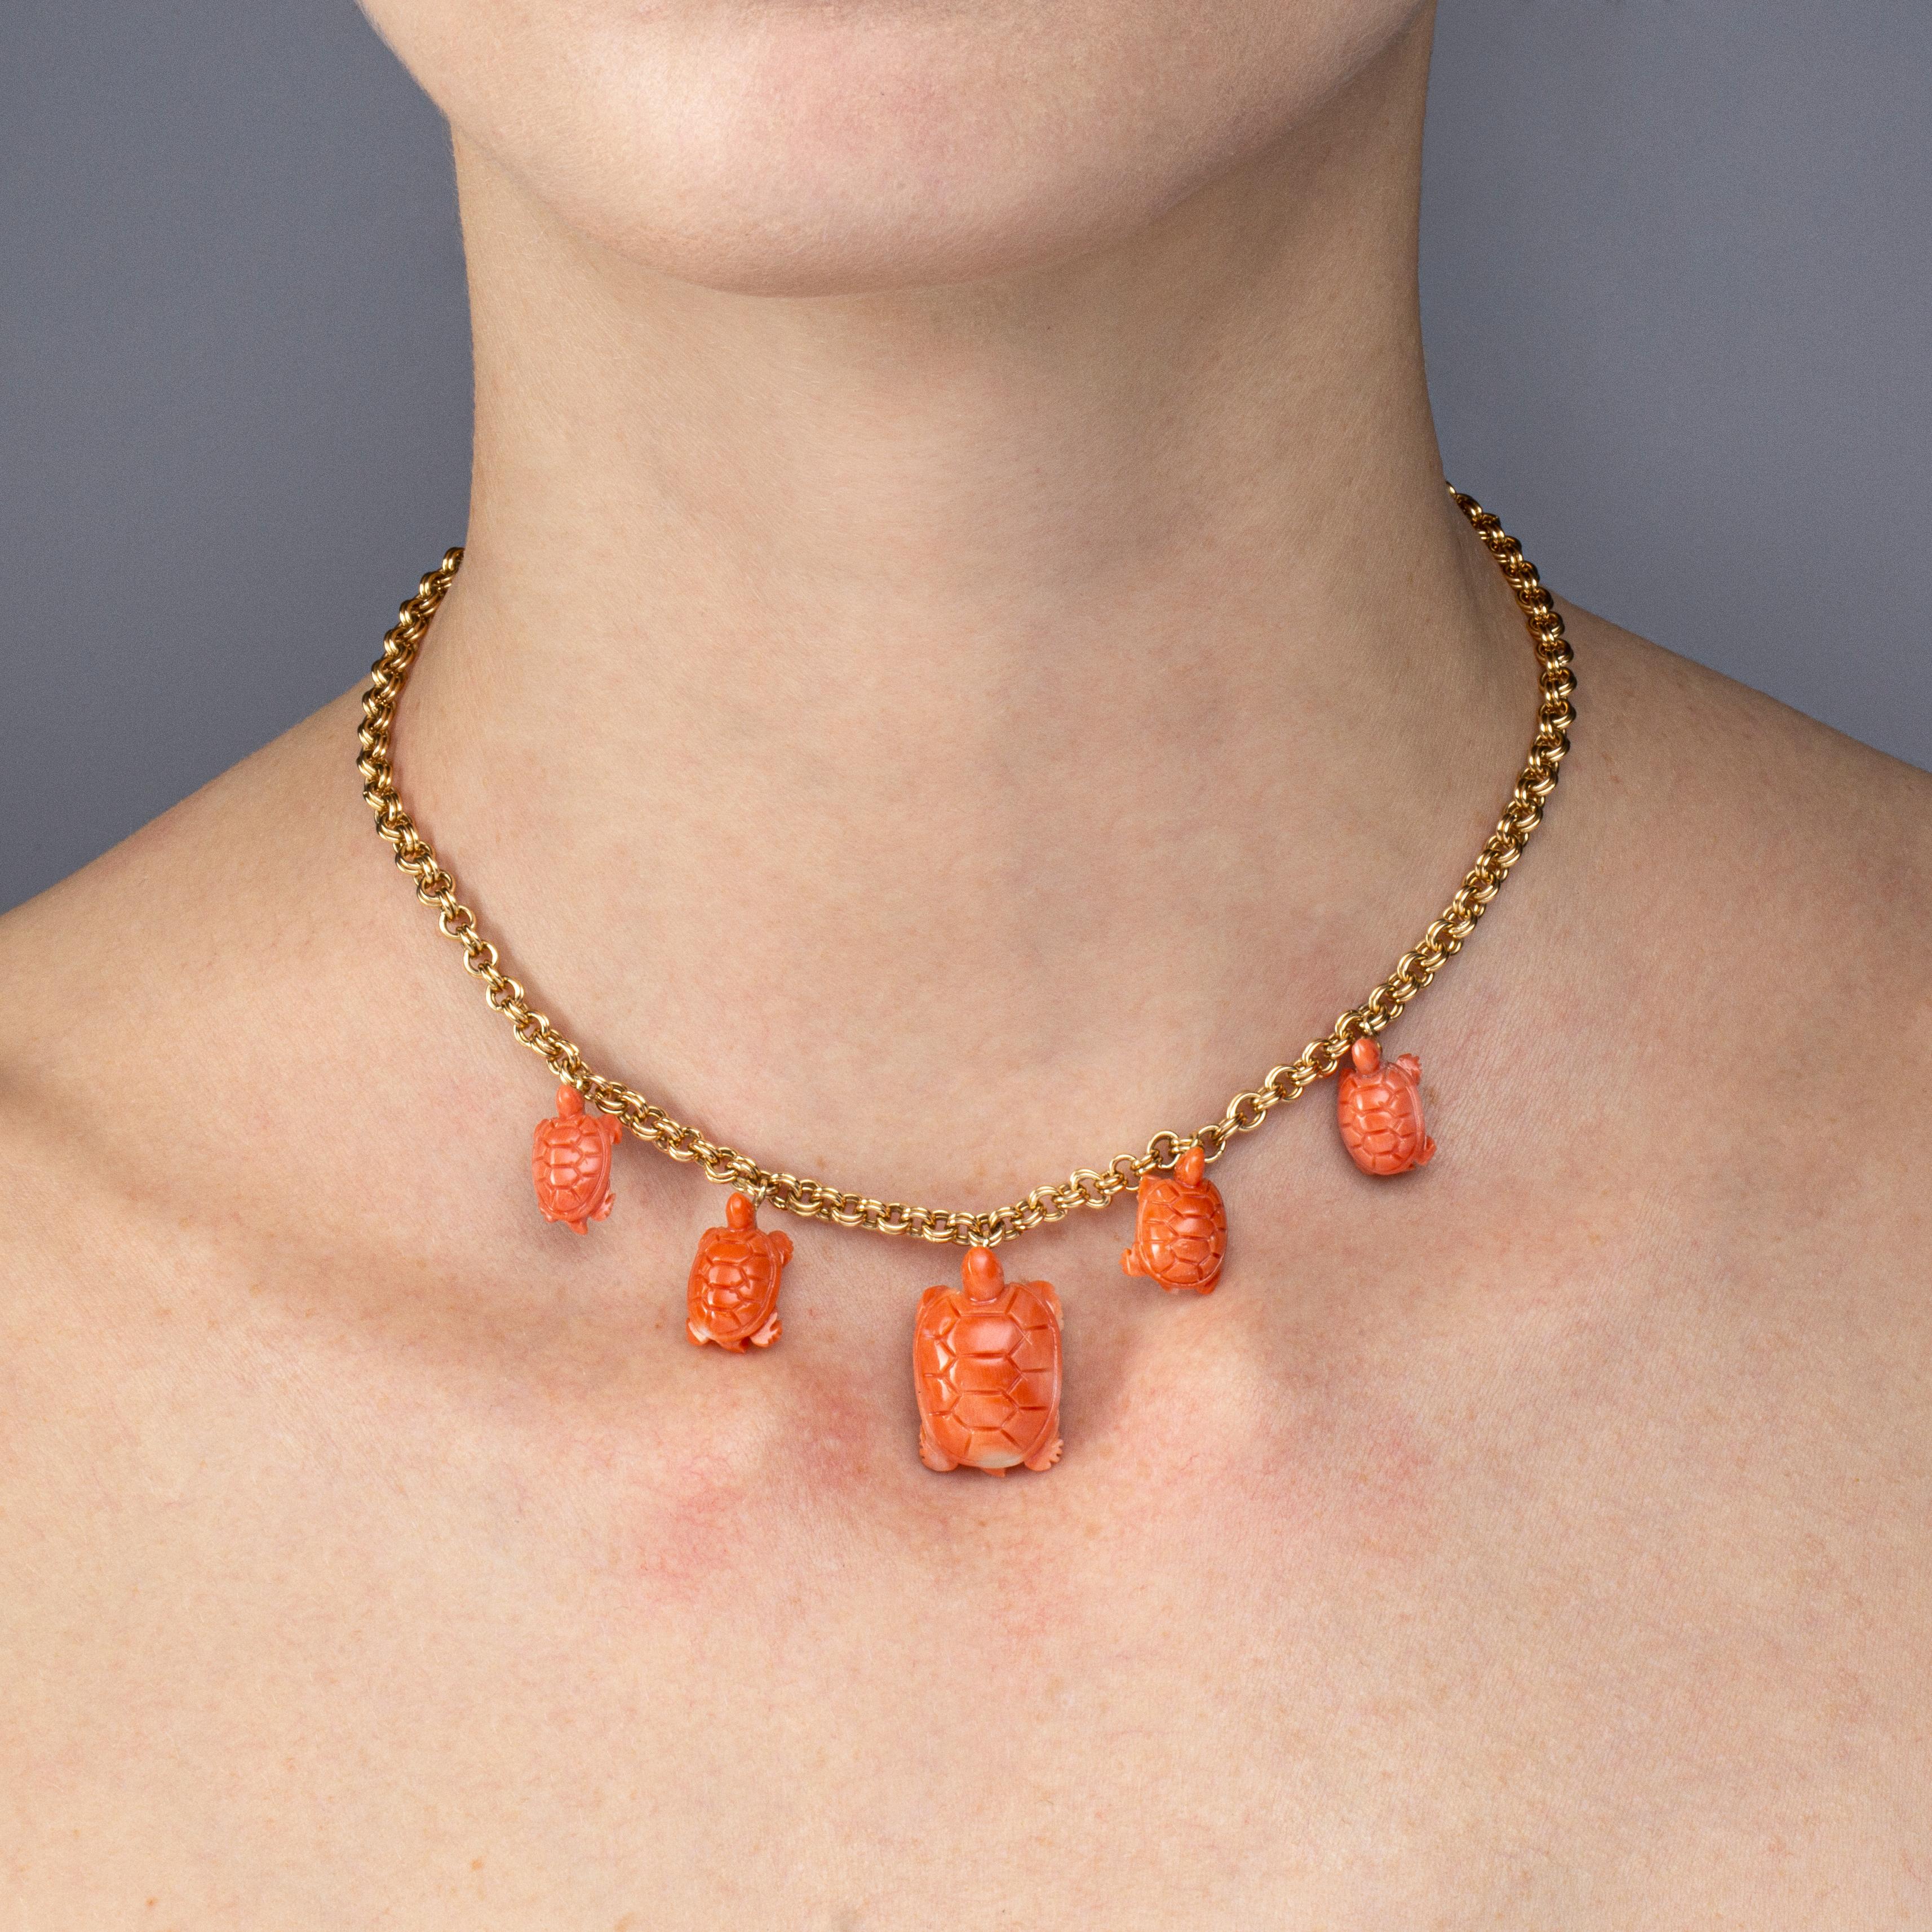 Alex Jona design collection, hand crafted in Italy, 18 karat yellow gold chain necklace with 7 turtle-shaped red coral charms.

Alex Jona jewels stand out, not only for their special design and for the excellent quality of the gemstones, but also